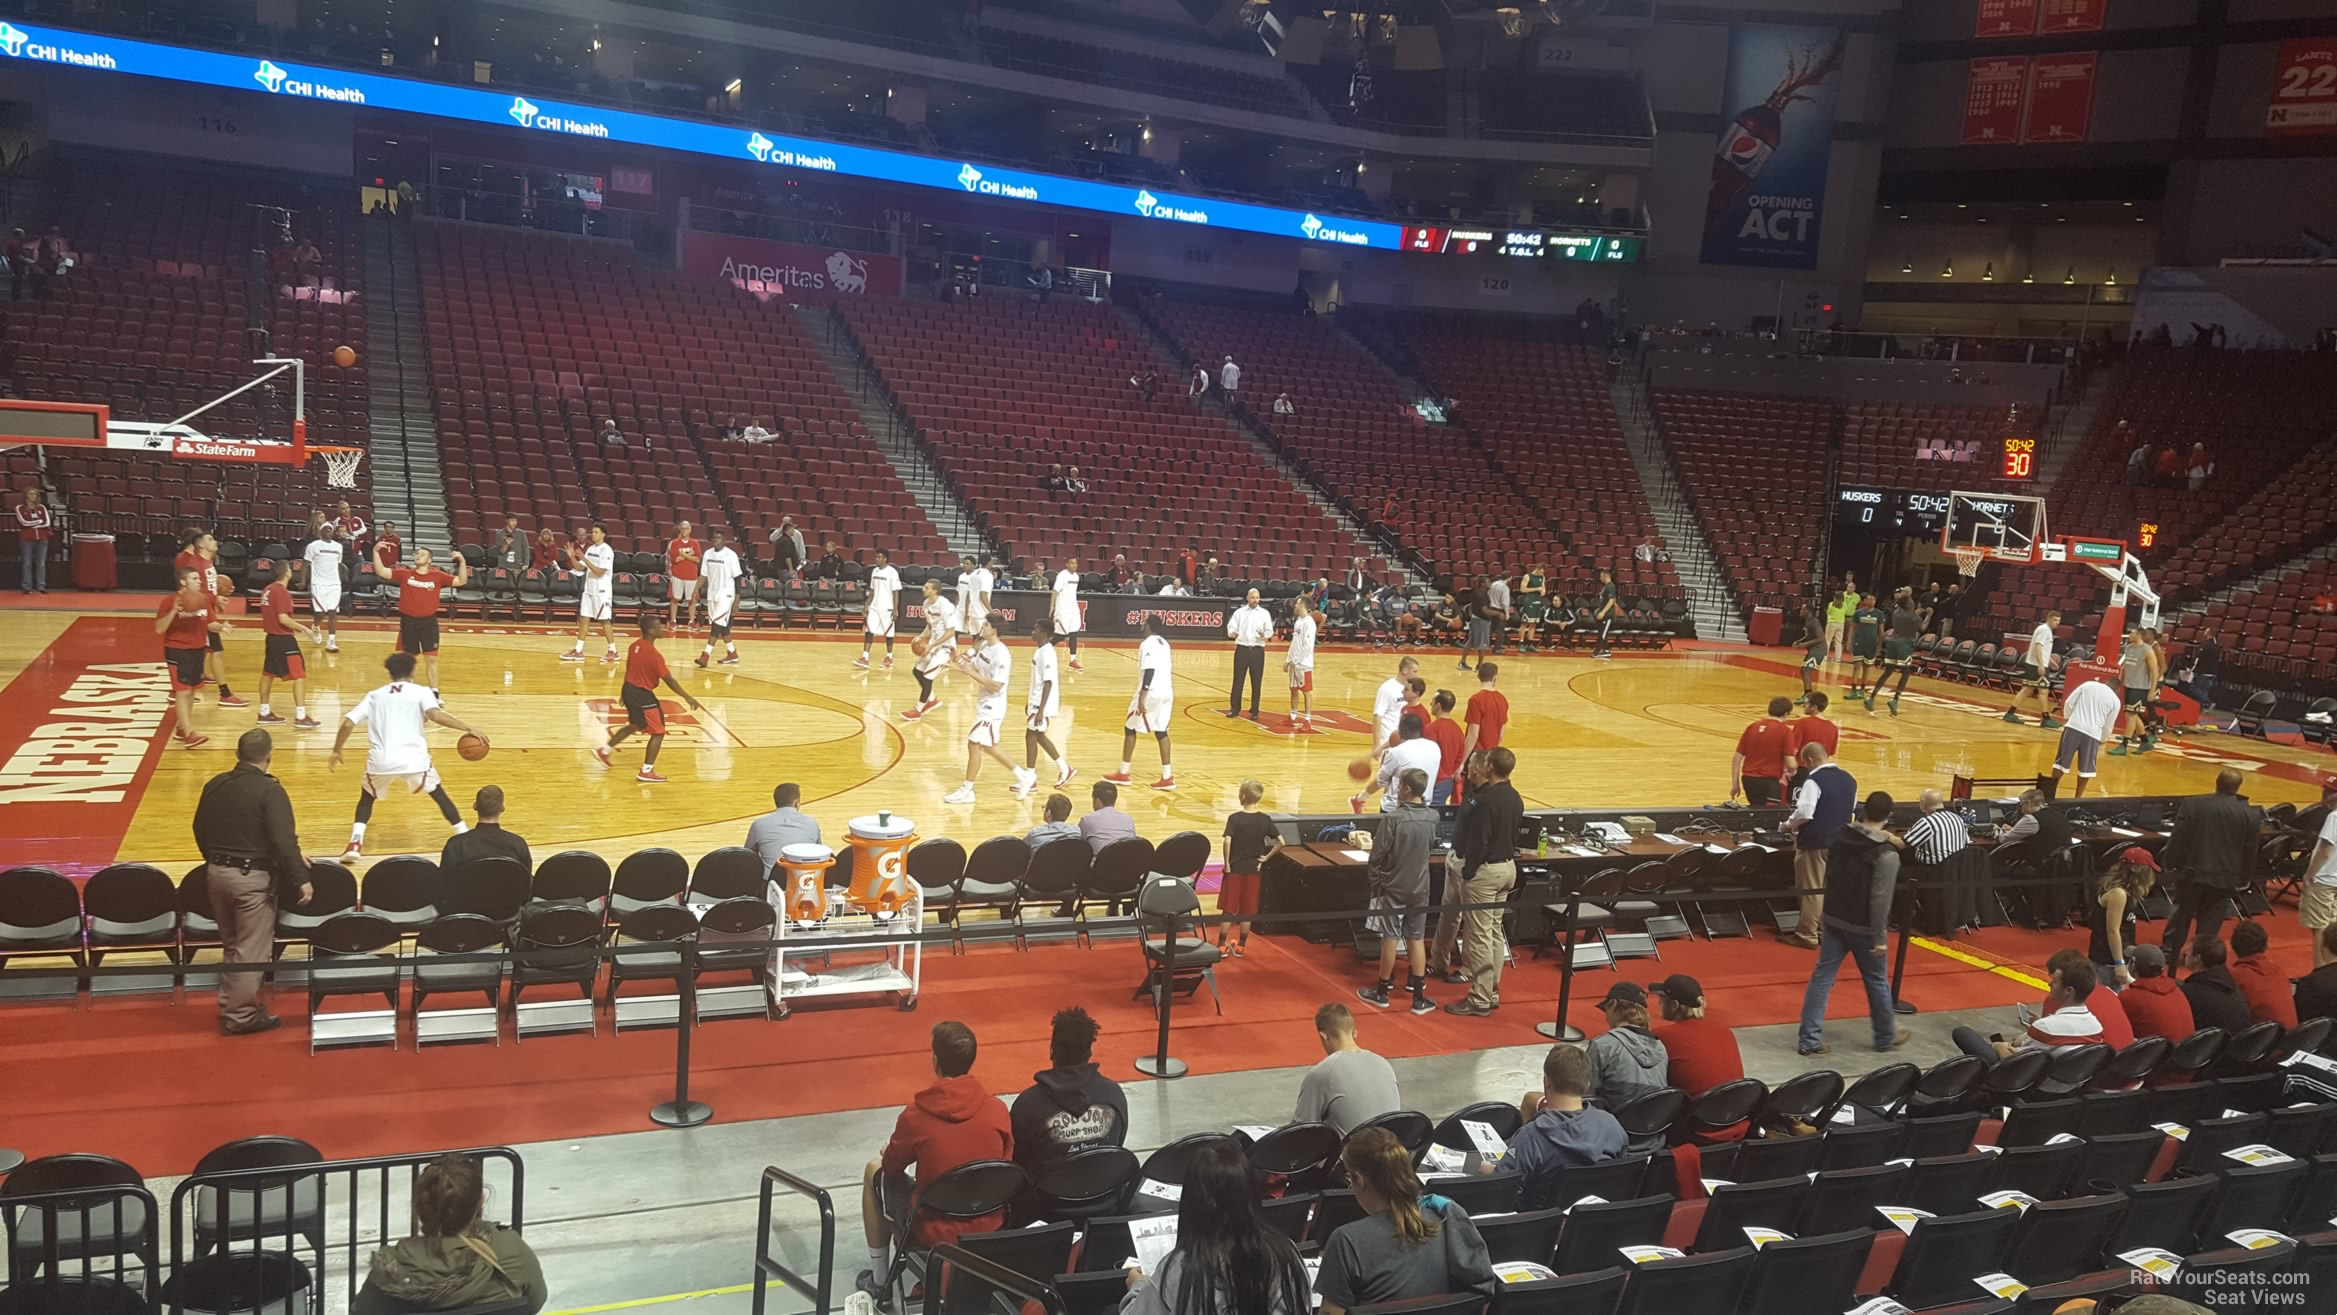 section 119, row 8 seat view  for basketball - pinnacle bank arena